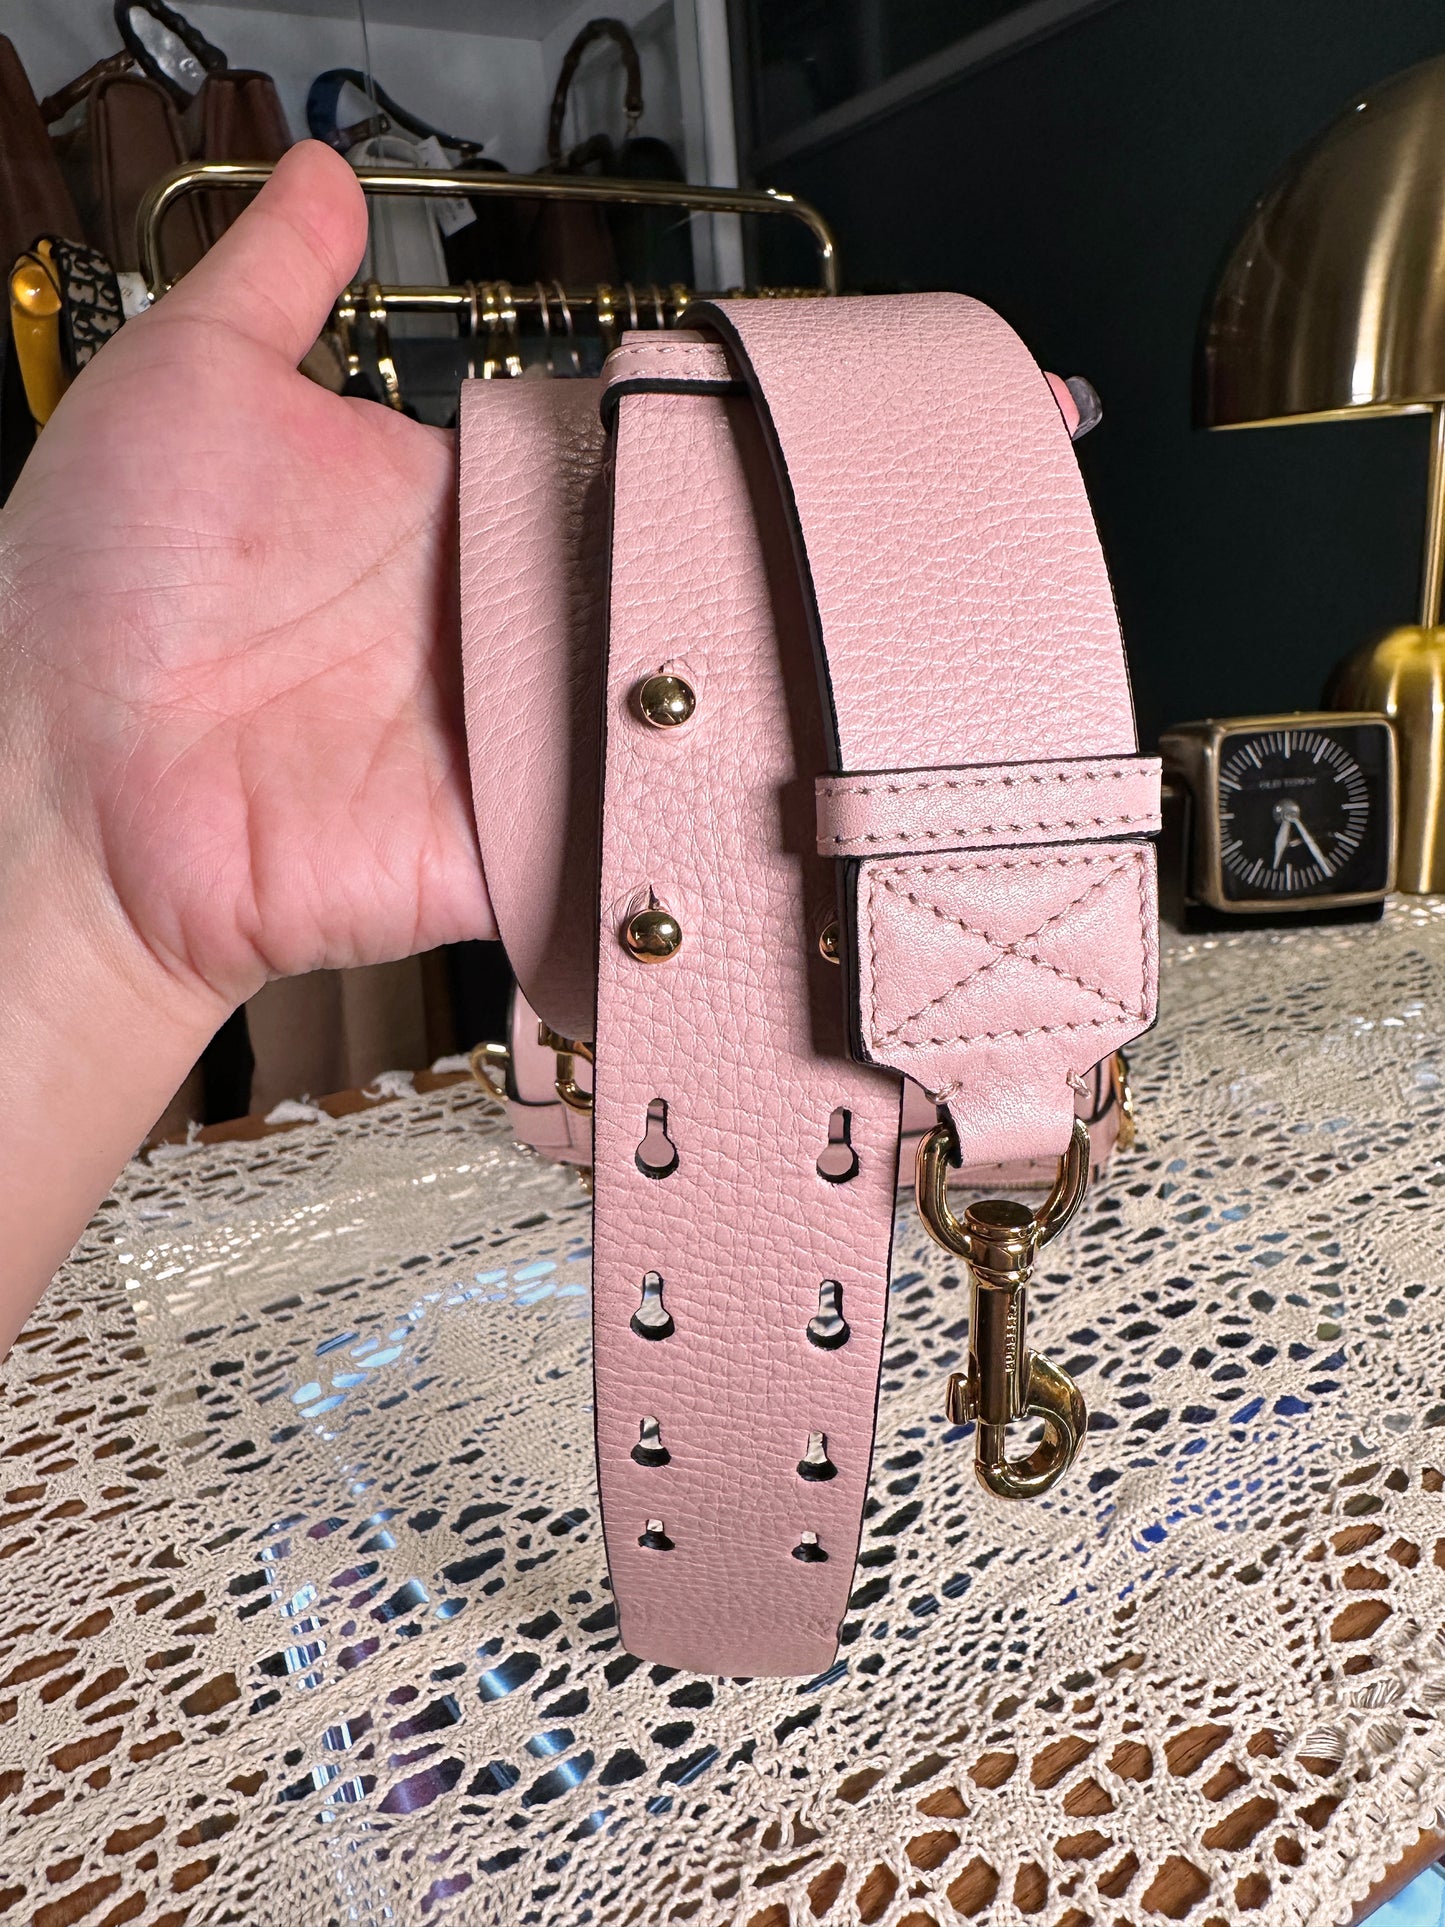 BURBERRY 100% Authentic Genuine BURBERRY Calfskin The Barrel Bag in Dusty Rose, Great Condition